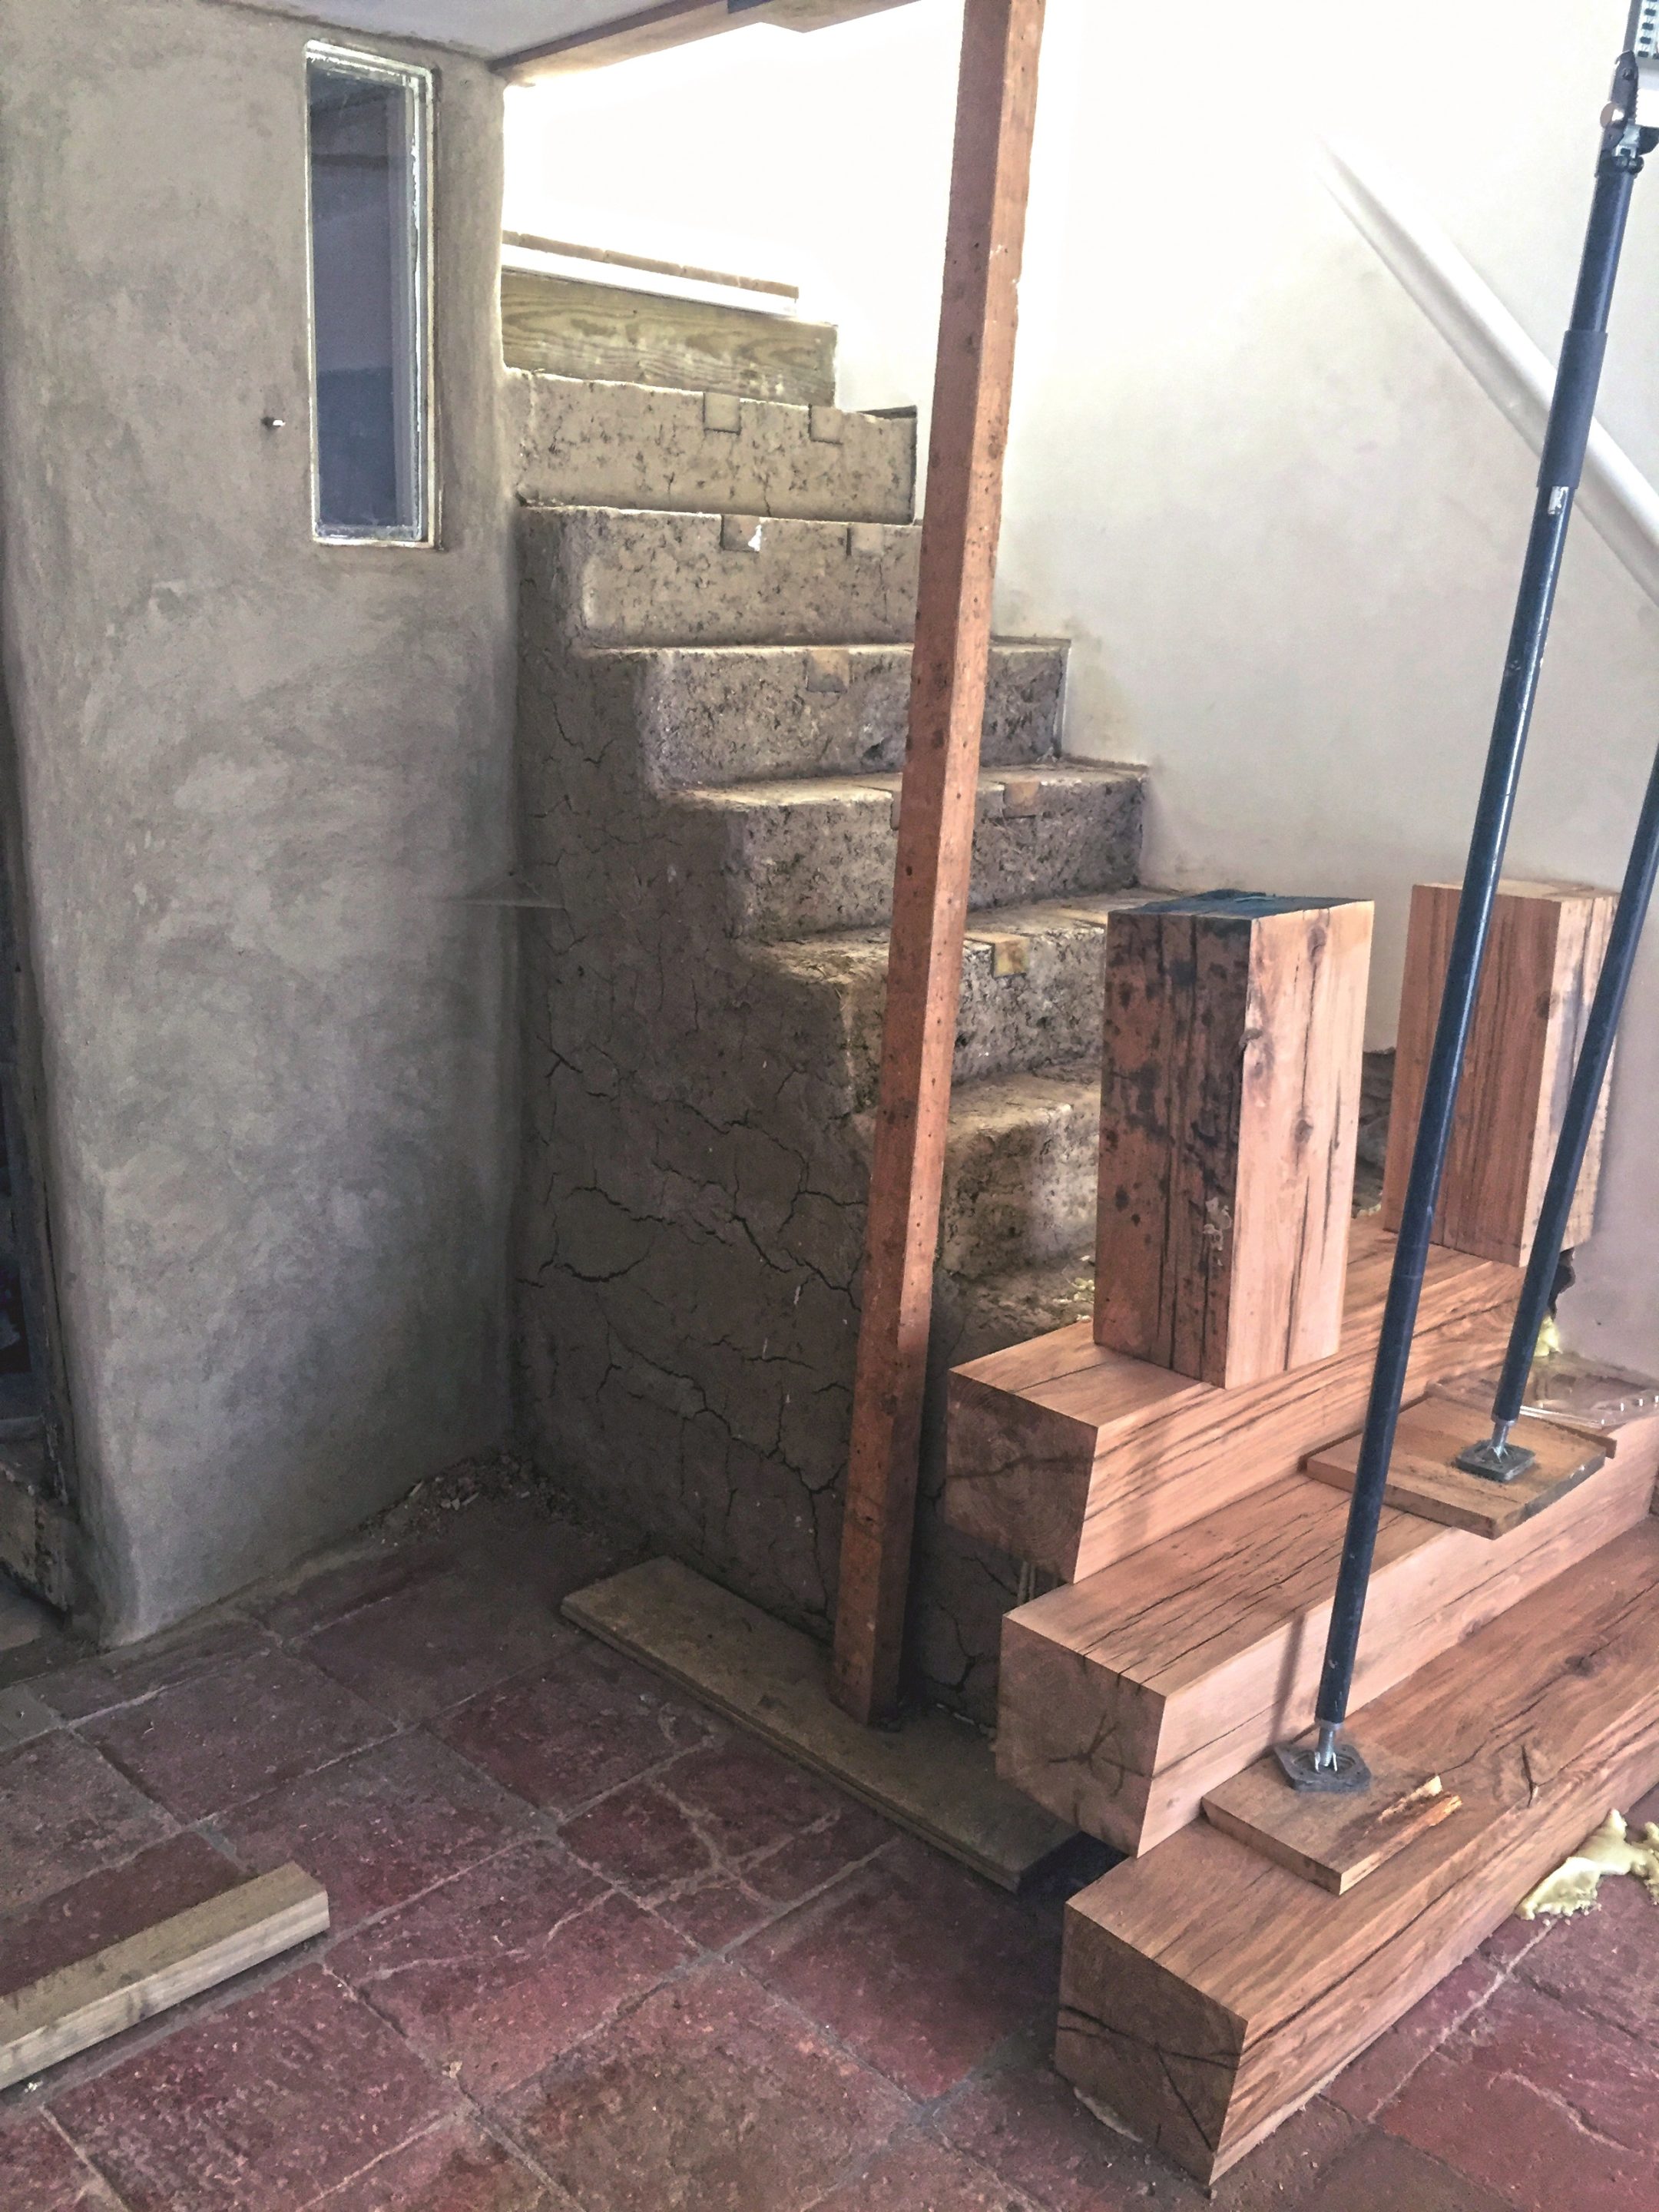 Building the staircase